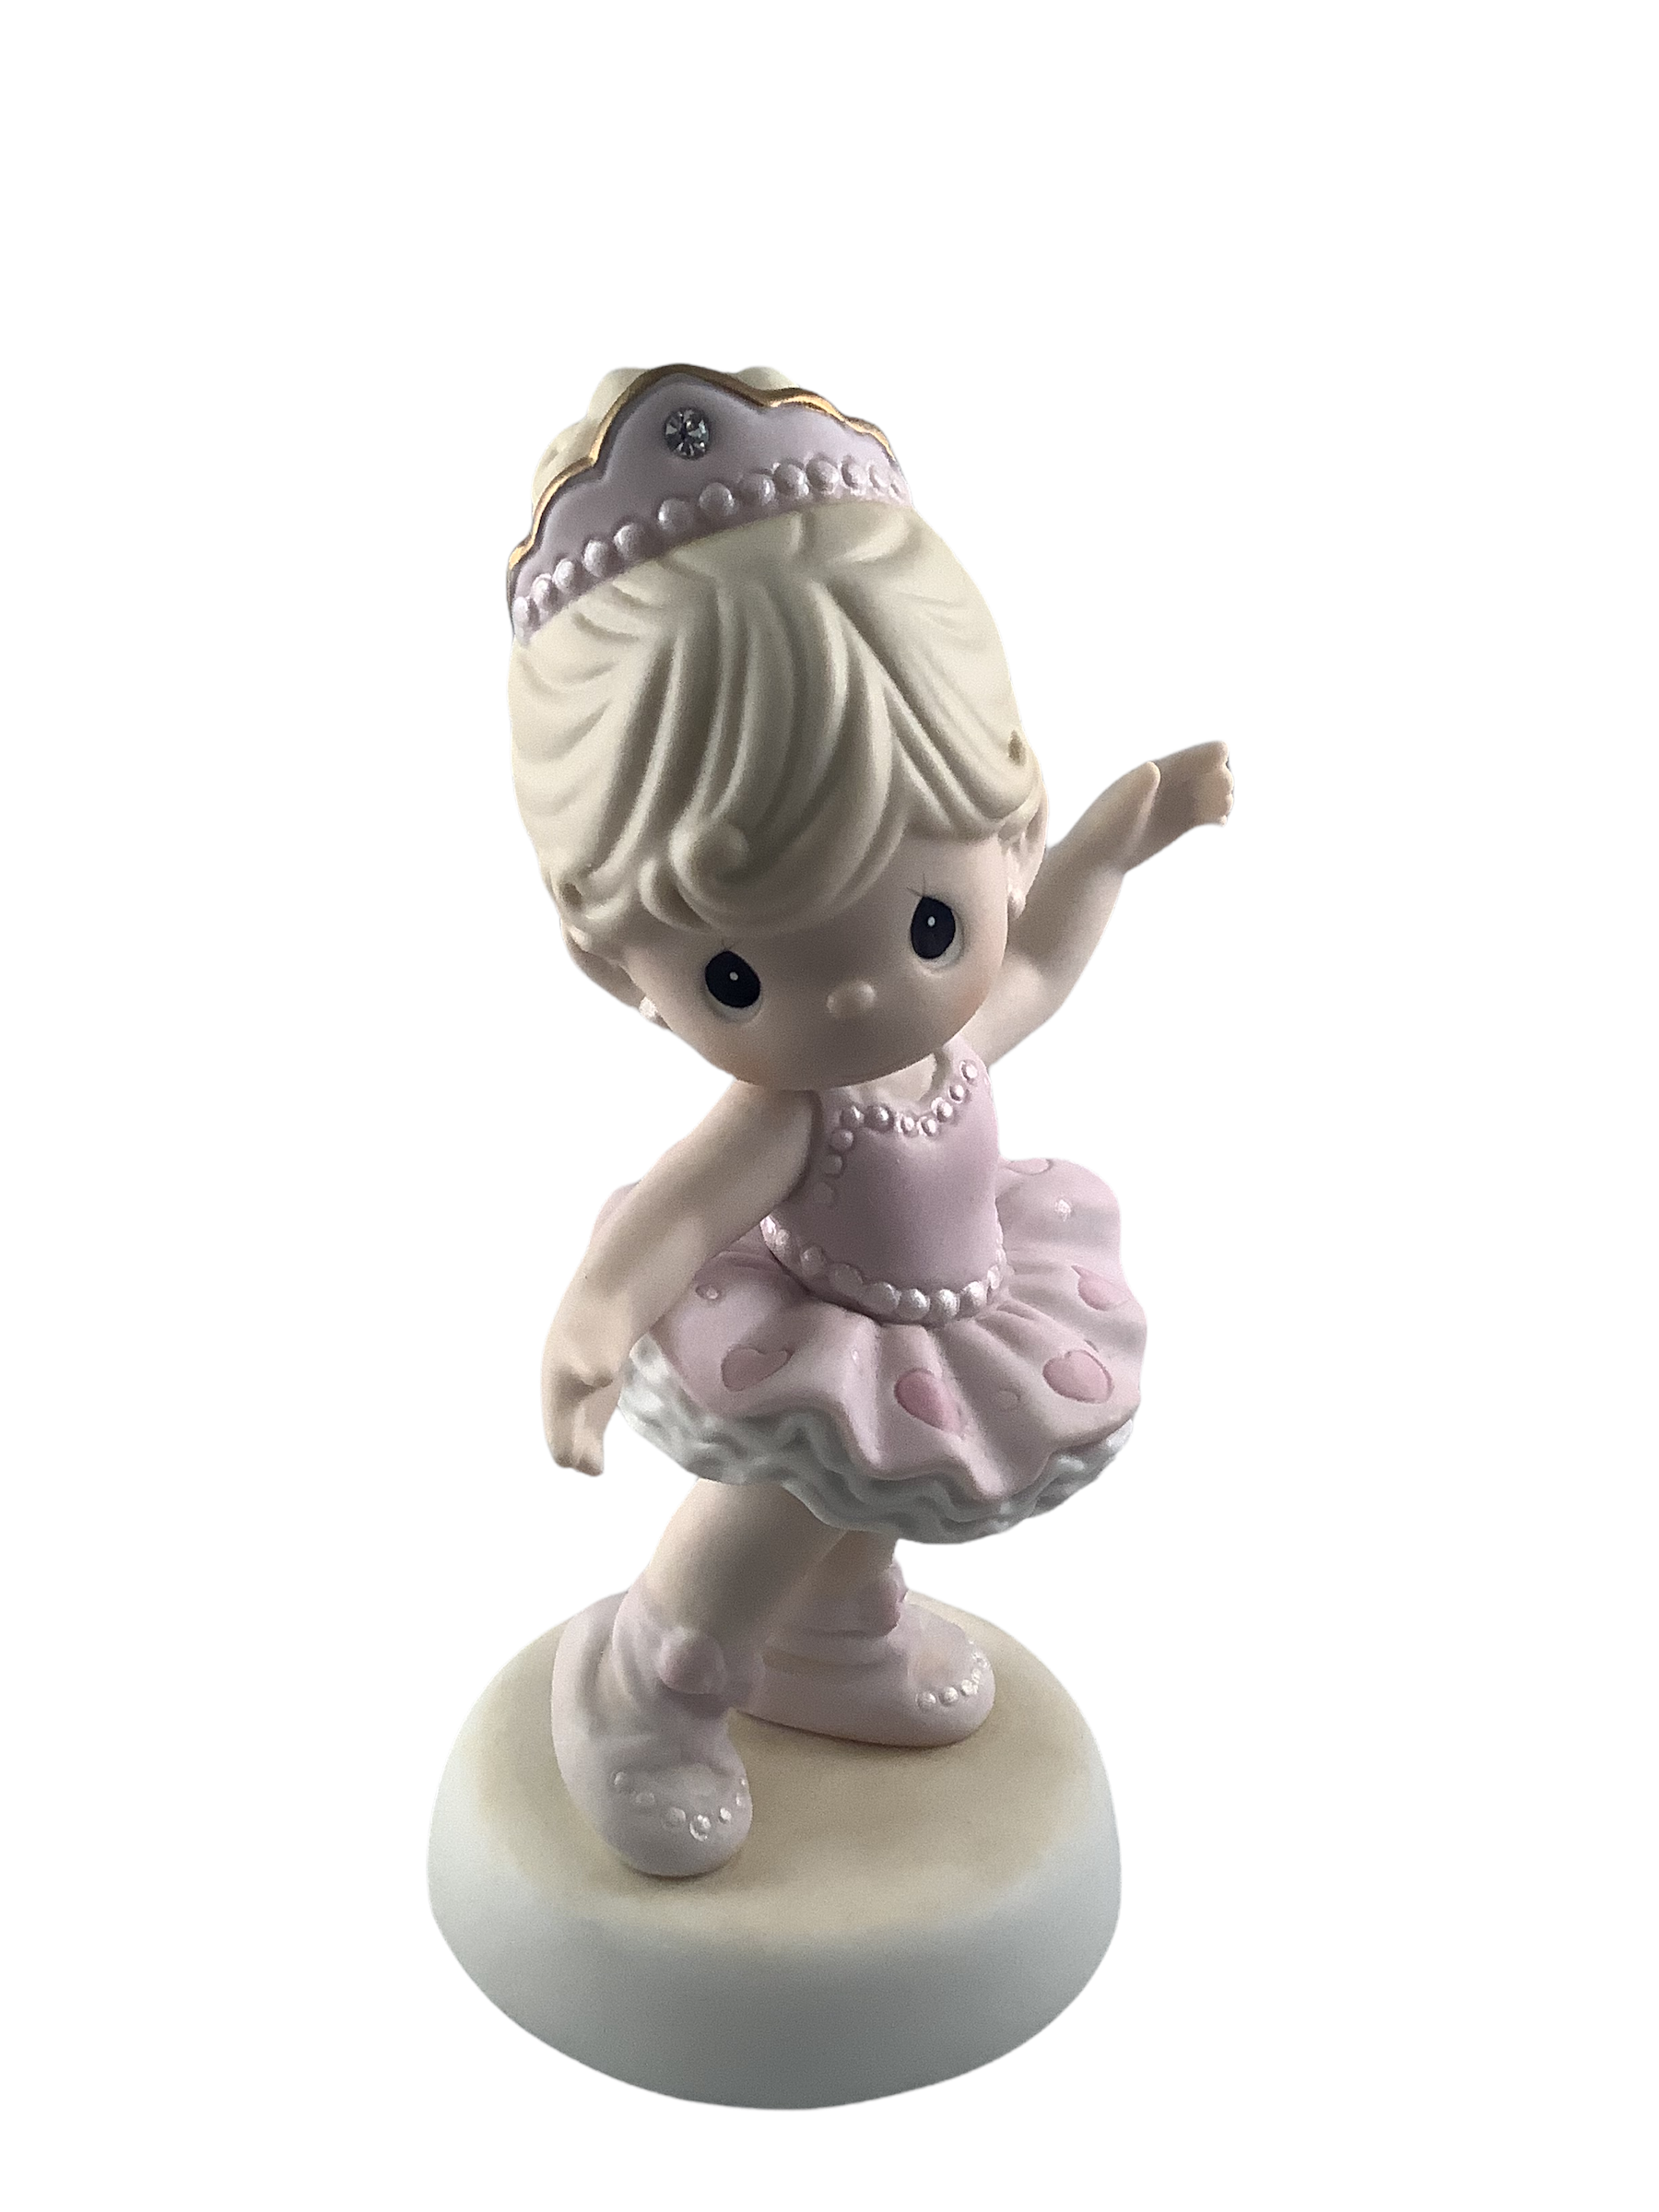 You Sparkle With Grace And Charm - Precious Moment Figurine